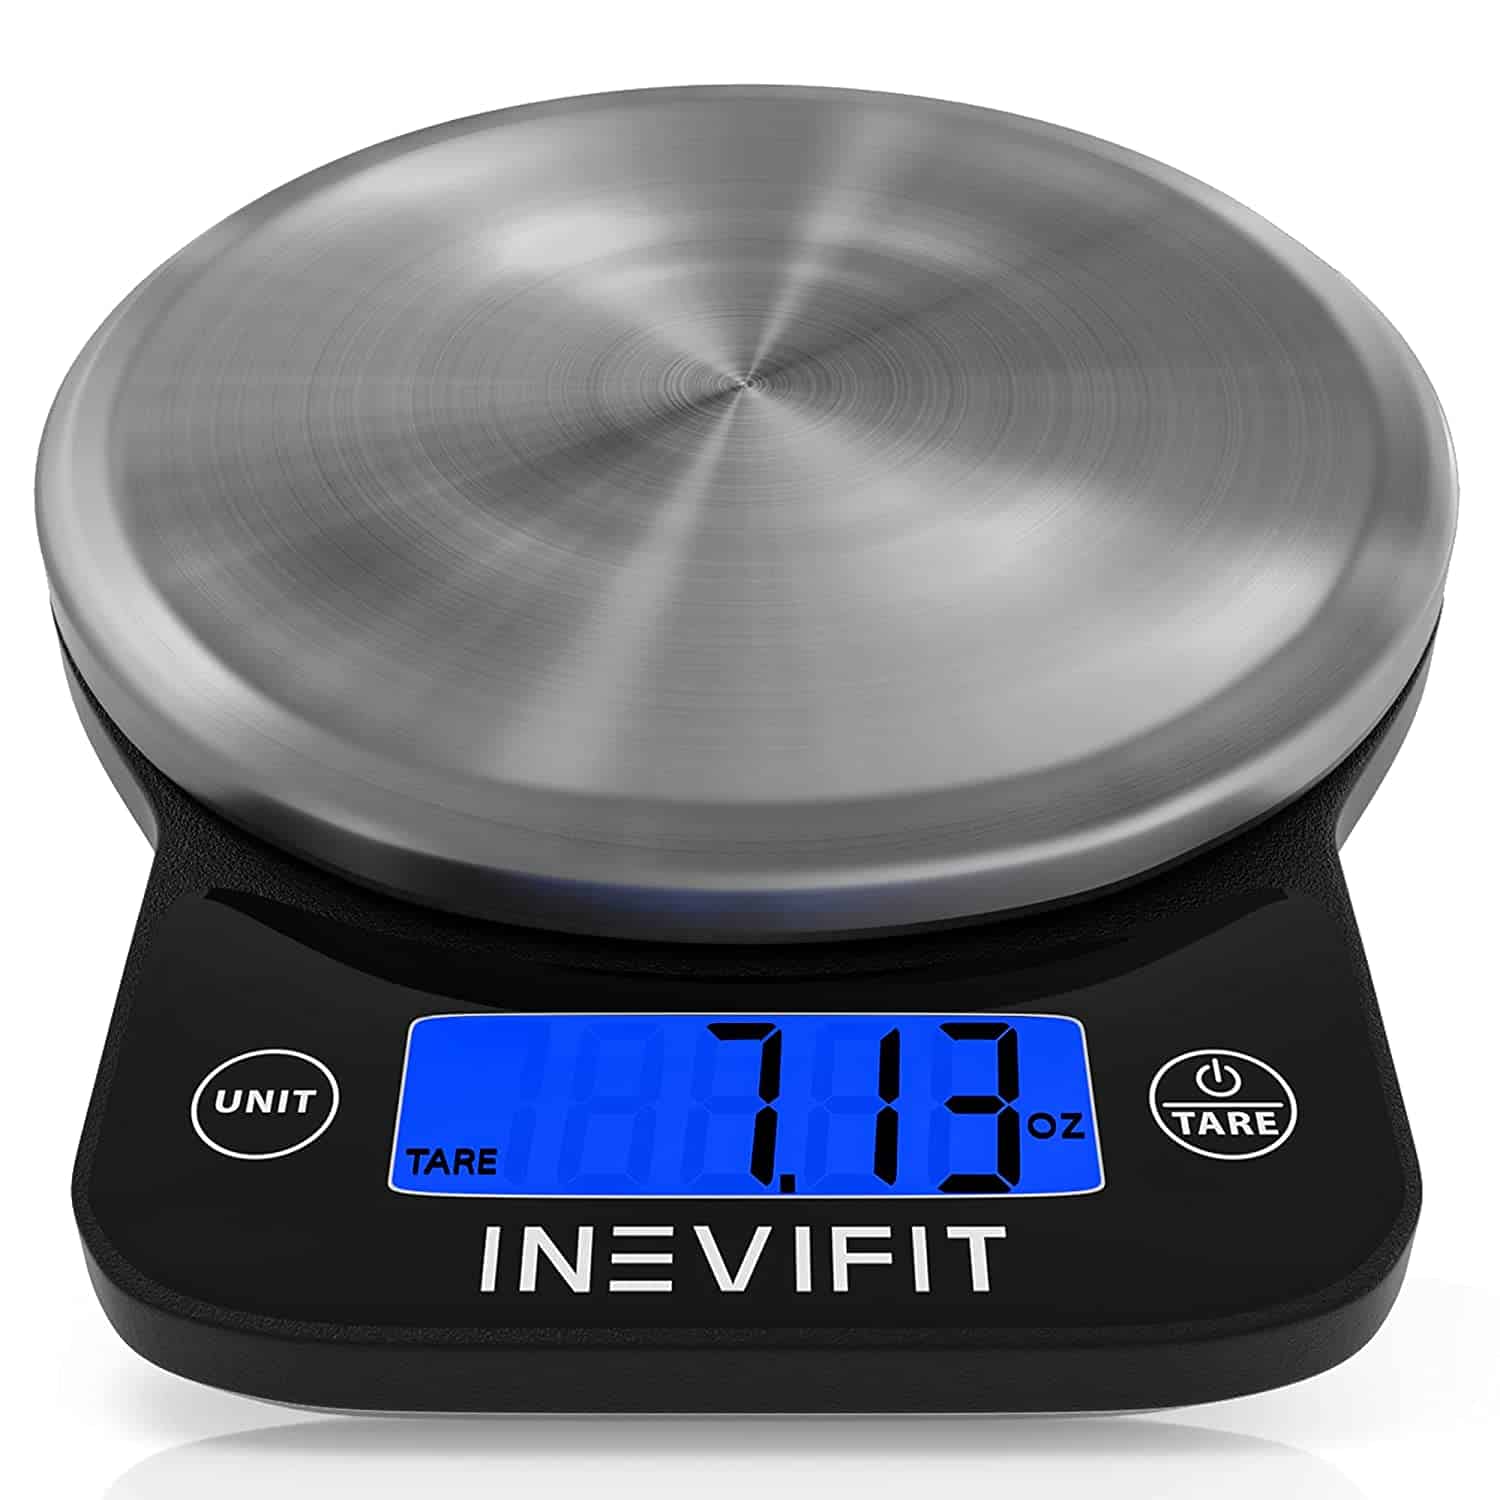 Inevifit Digital Kitchen Scale, Accurate Multi-Function Food